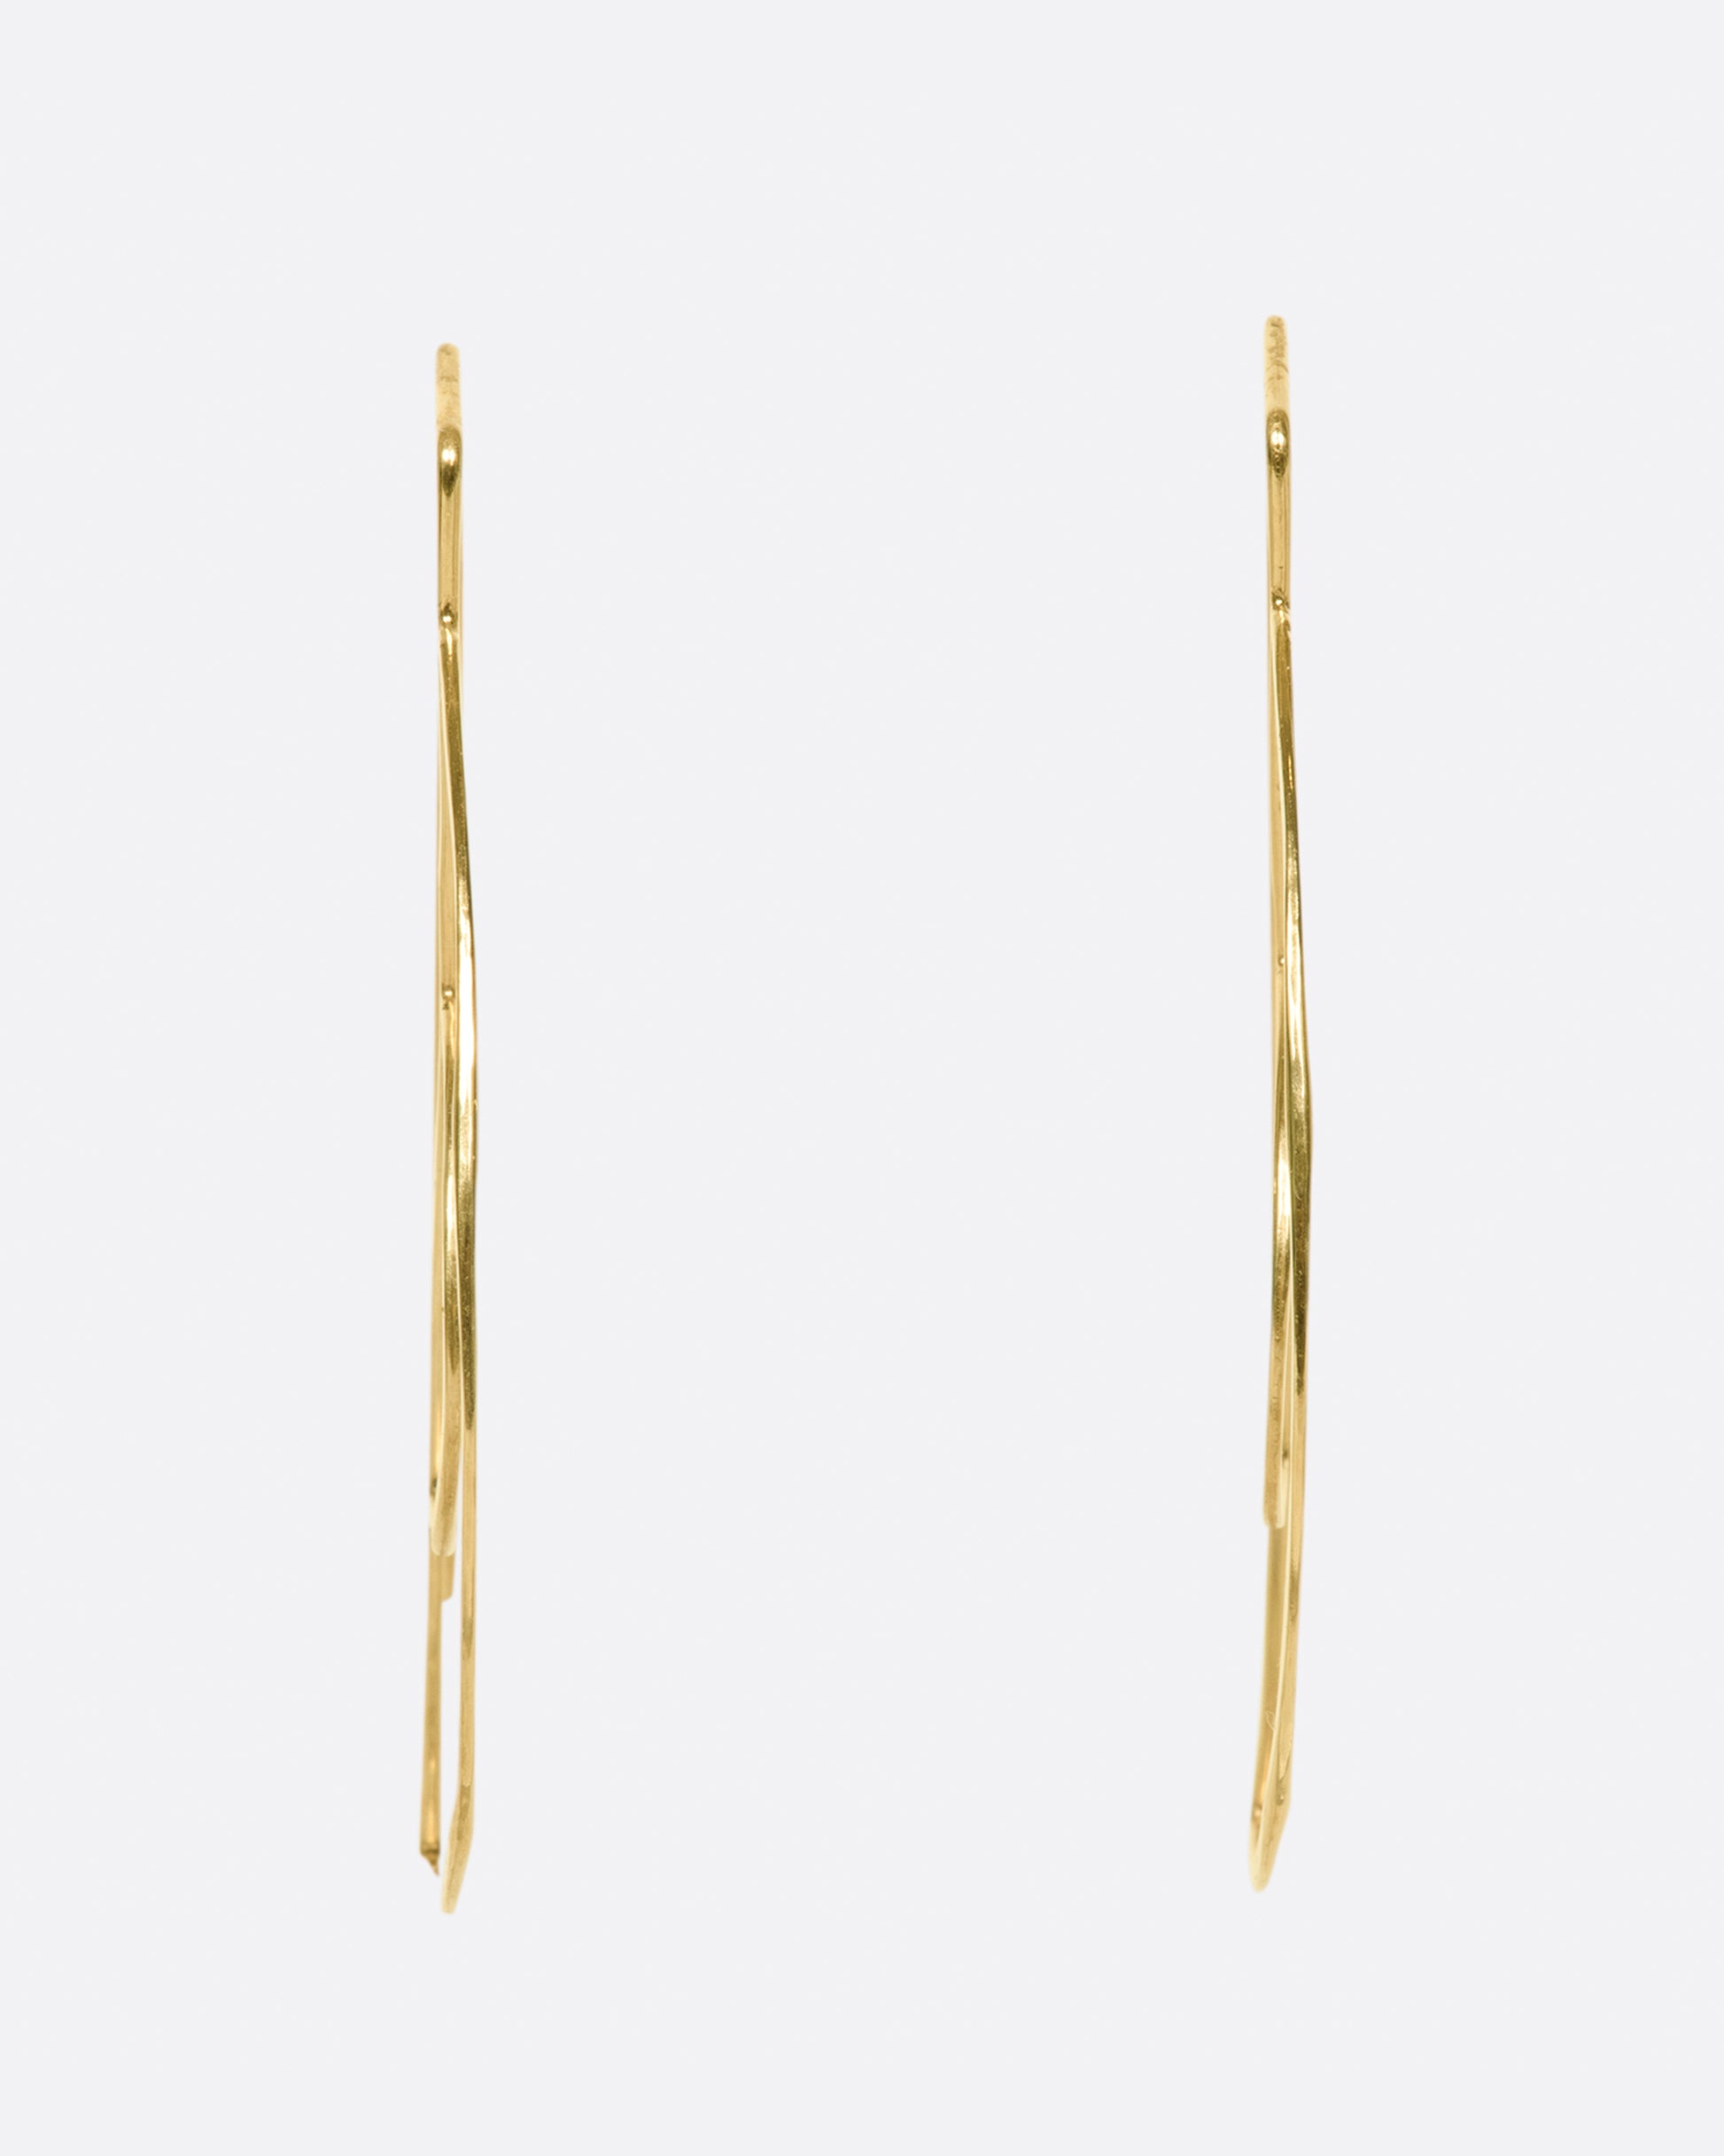 If you're looking for a delicate threader that makes a statement - you've found them.